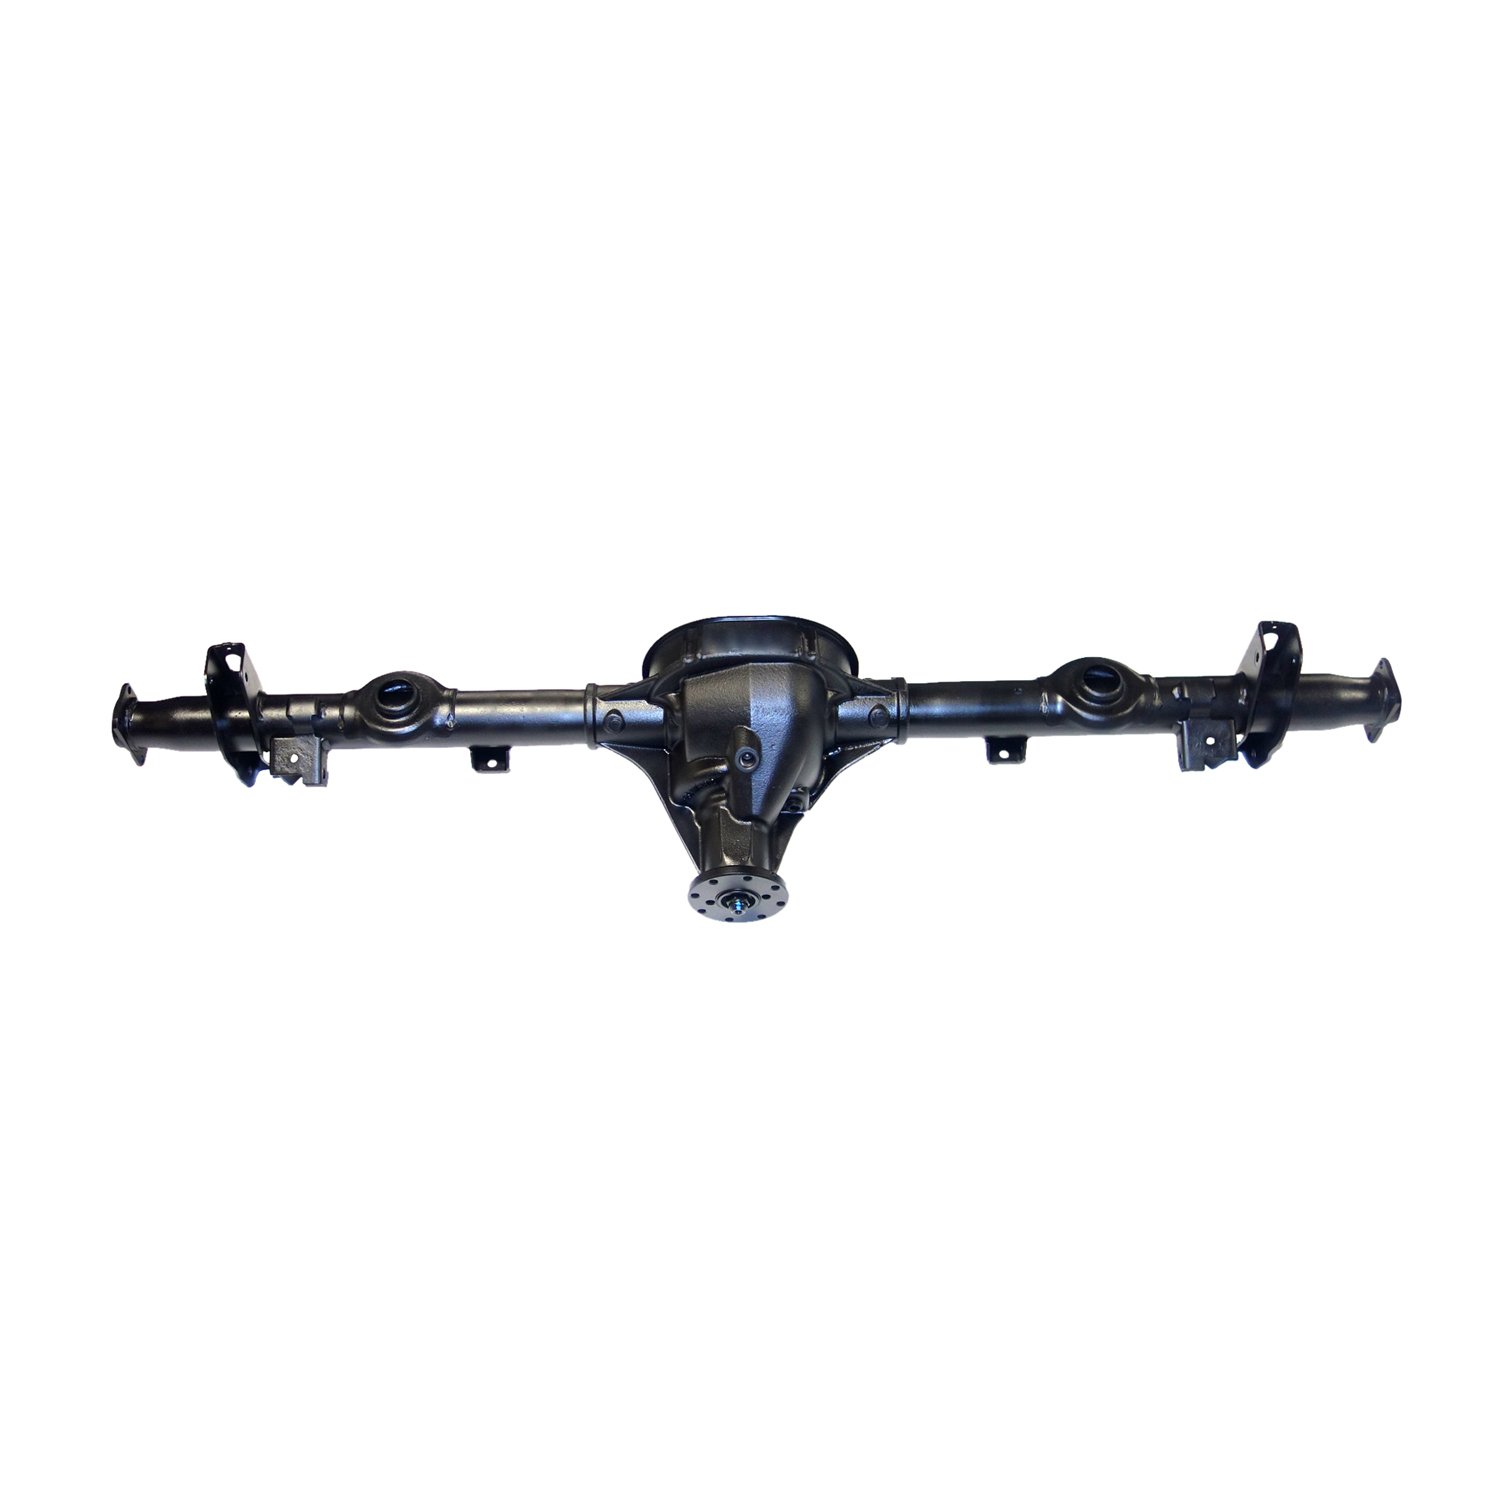 Remanufactured Axle Assembly for 8.8" 1998 & 2001-02 Crown Vic Police, W/ABS, 3.27 , Posi